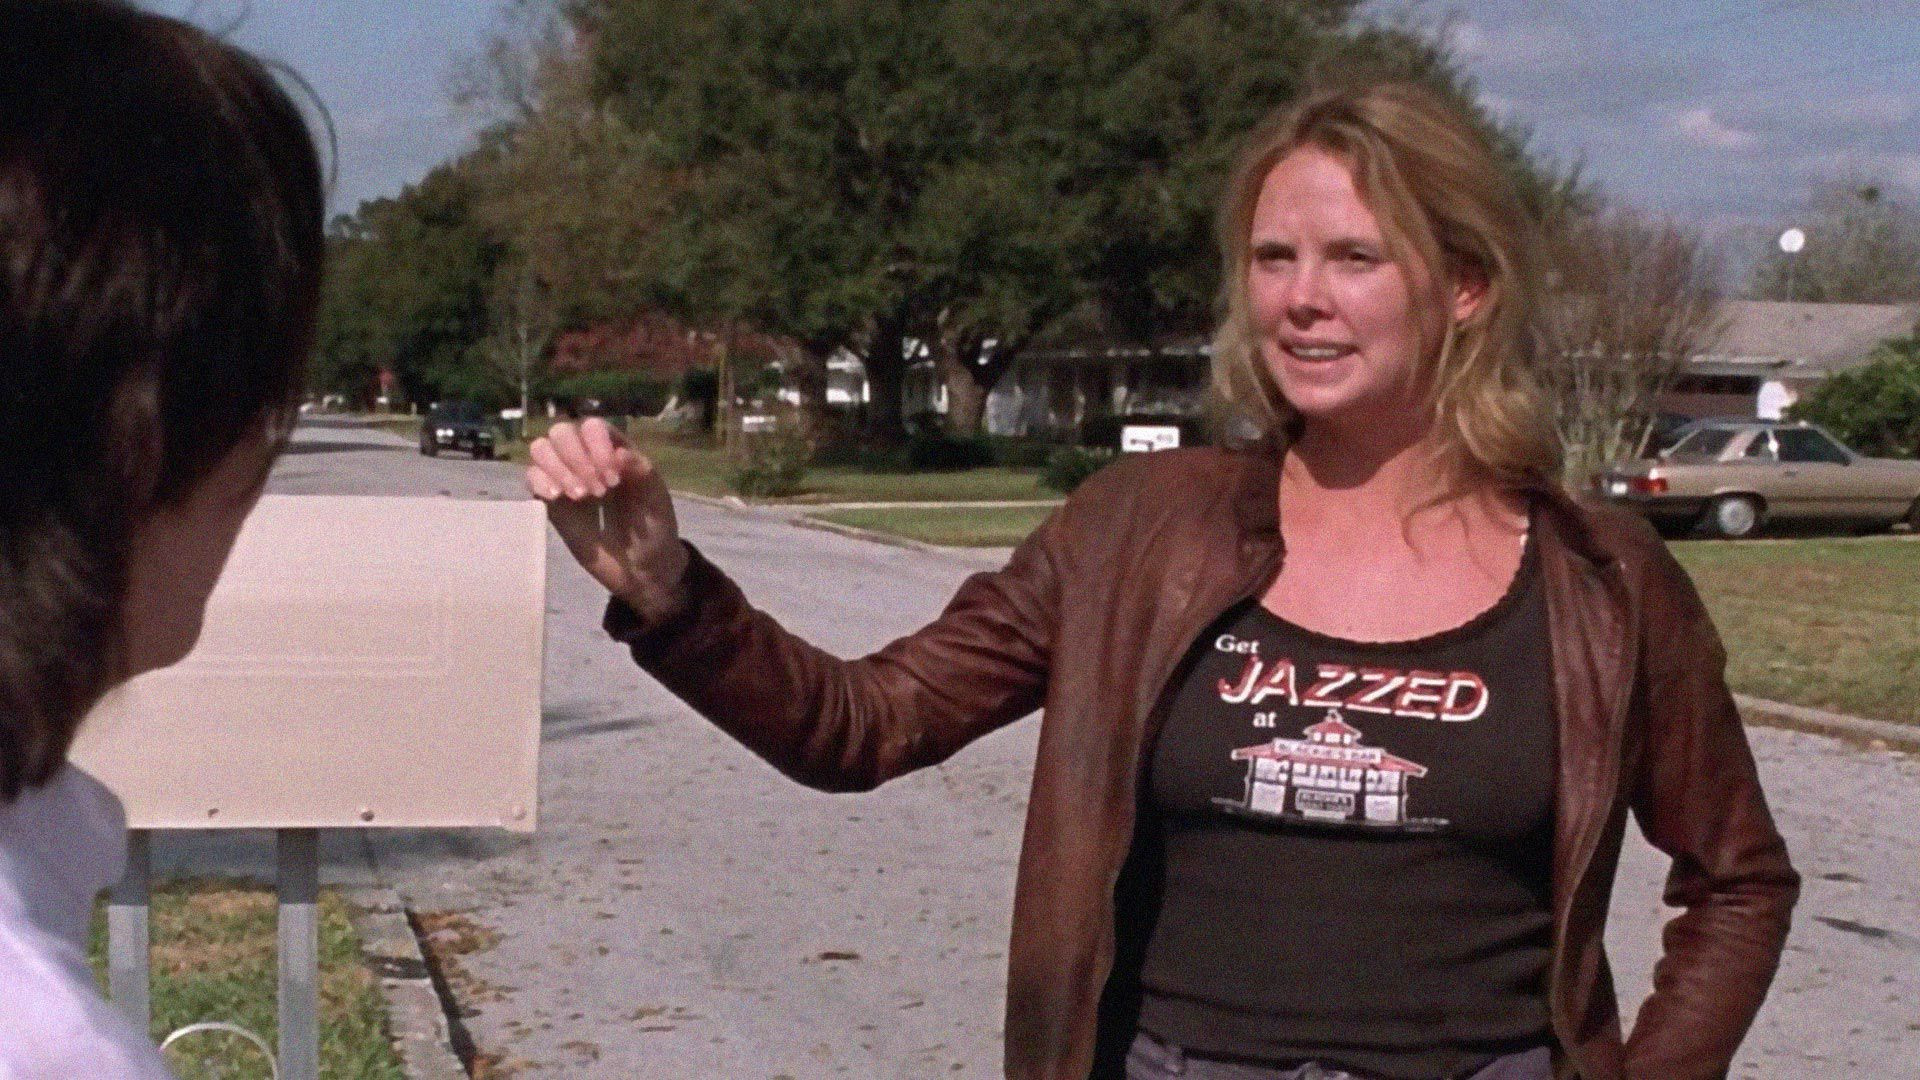 Charlize Theron in Monster, resting her hand on a mailbox while talking to someone. She wears a shirt that says “Get JAZZED at” with a picture of an establishment.